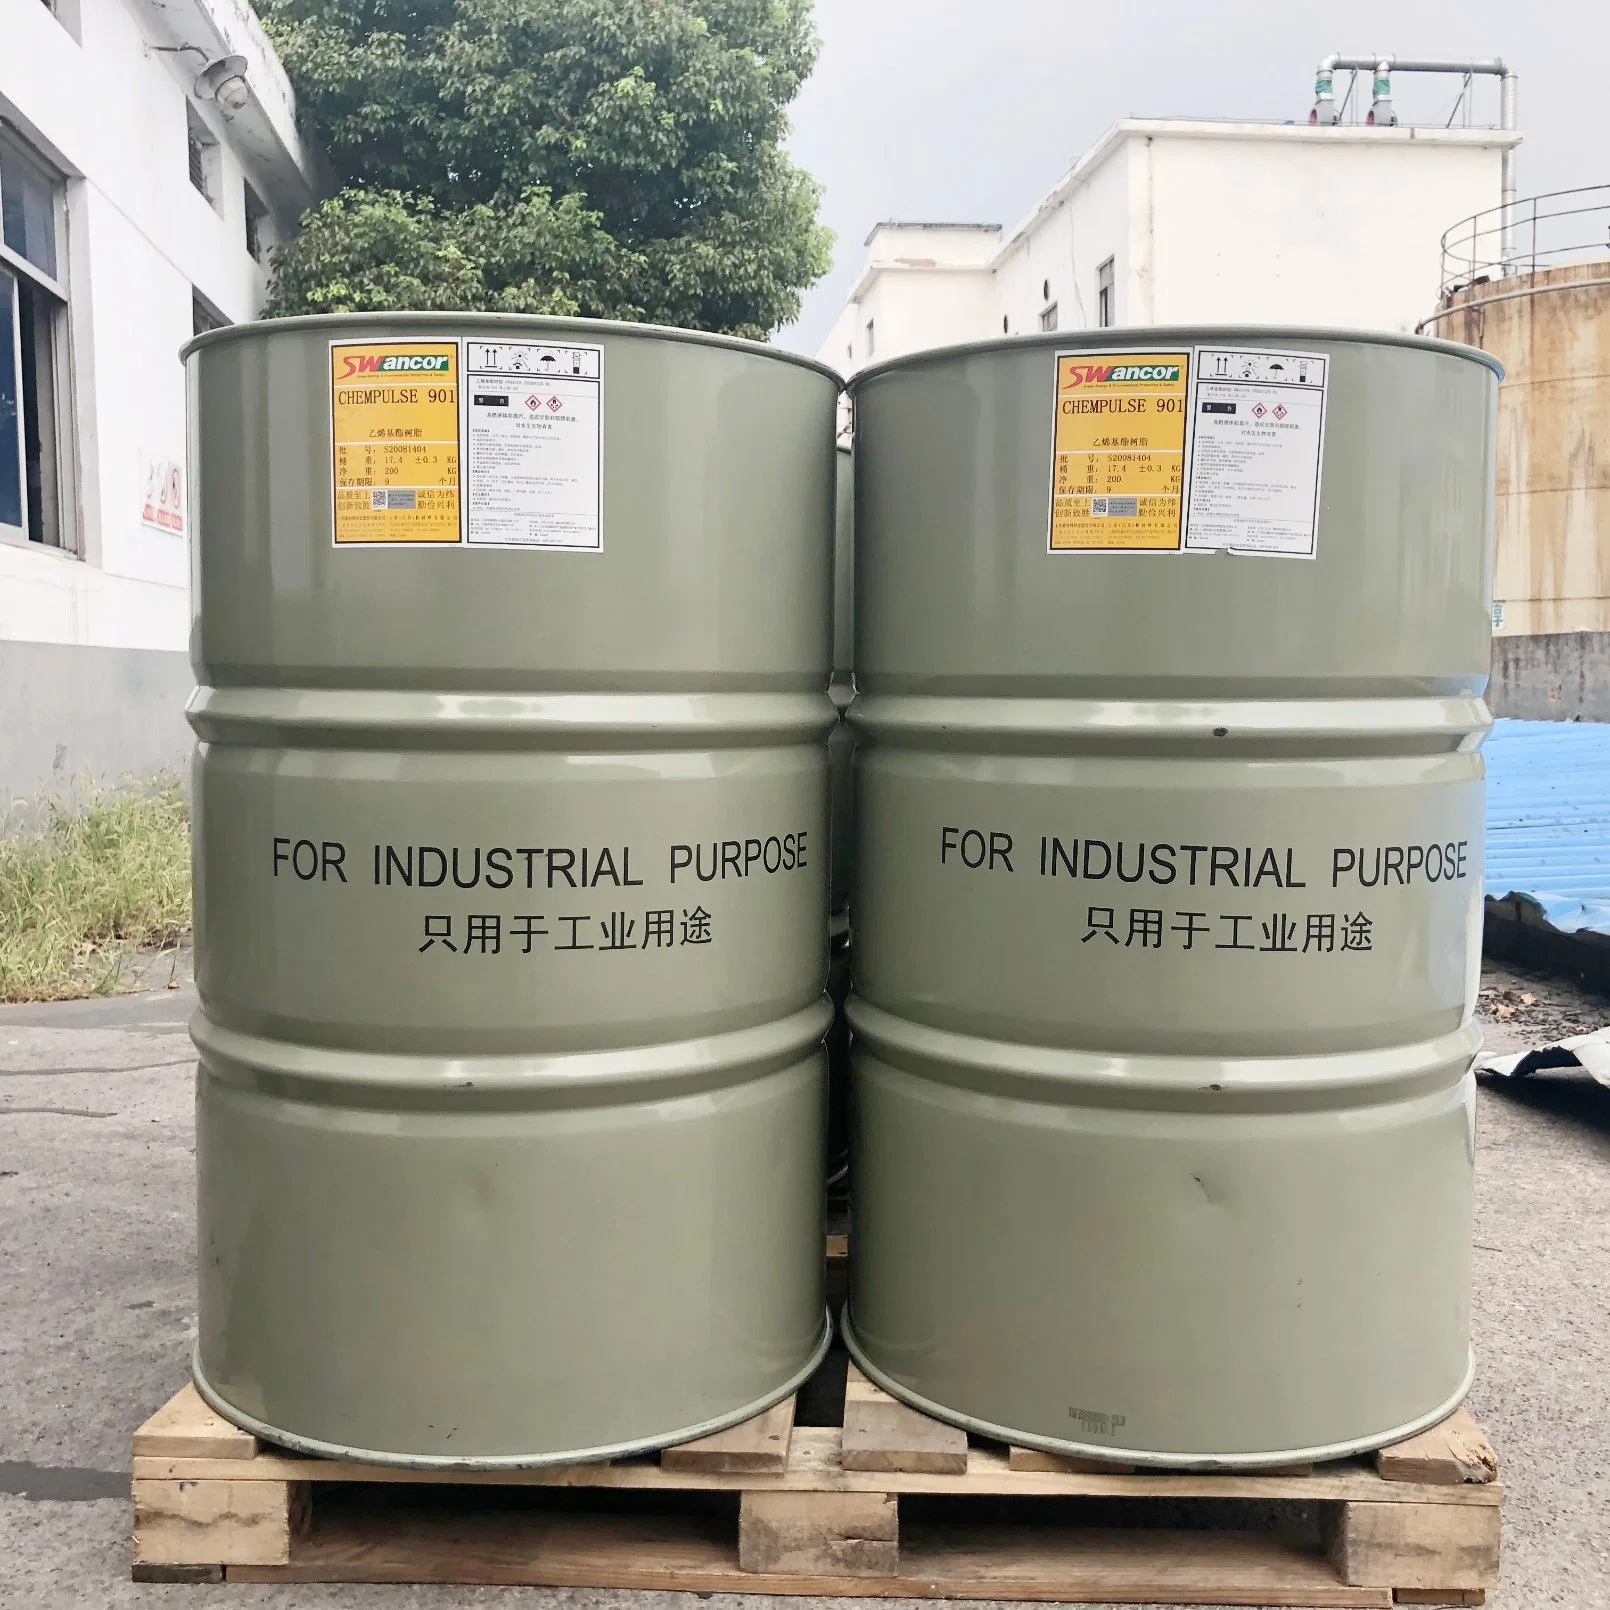 Relatively Stable Chemical Performance Swancor 901 Epoxy Vinyl Ester Resin for Chemical Industry